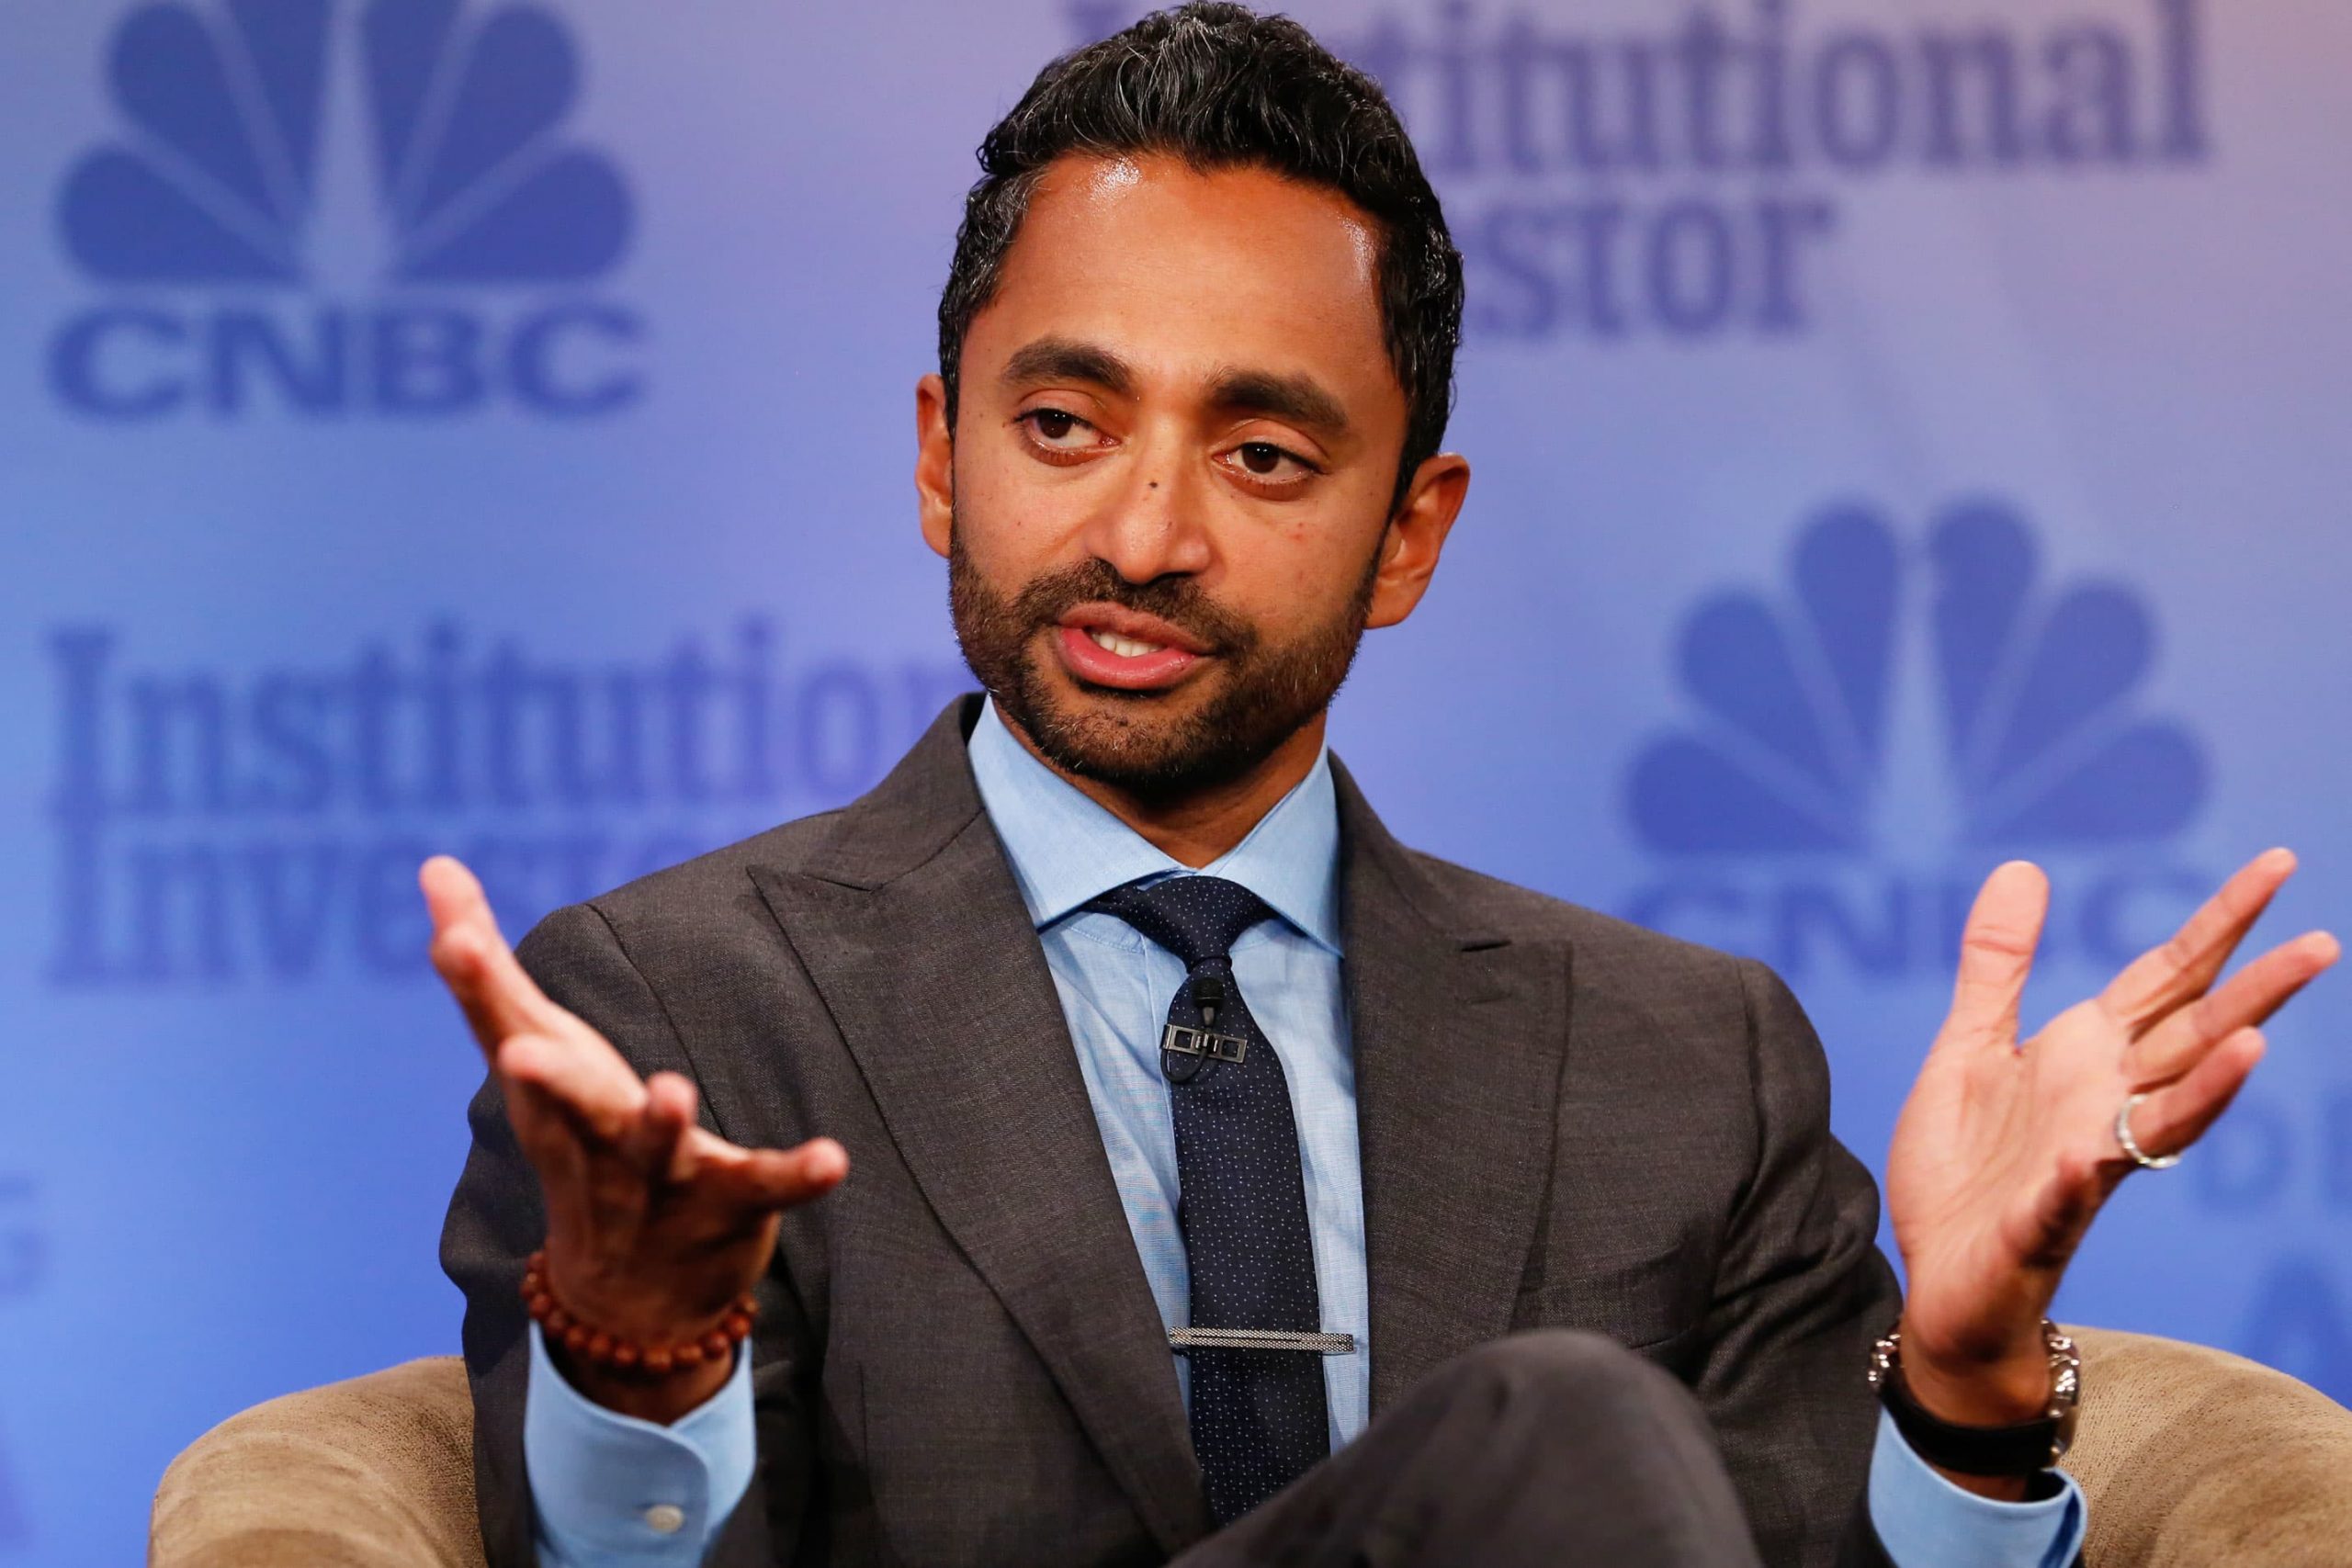 Chamath Palihapitiya closes GameStop place, however defends traders’ proper to sway shares like professionals